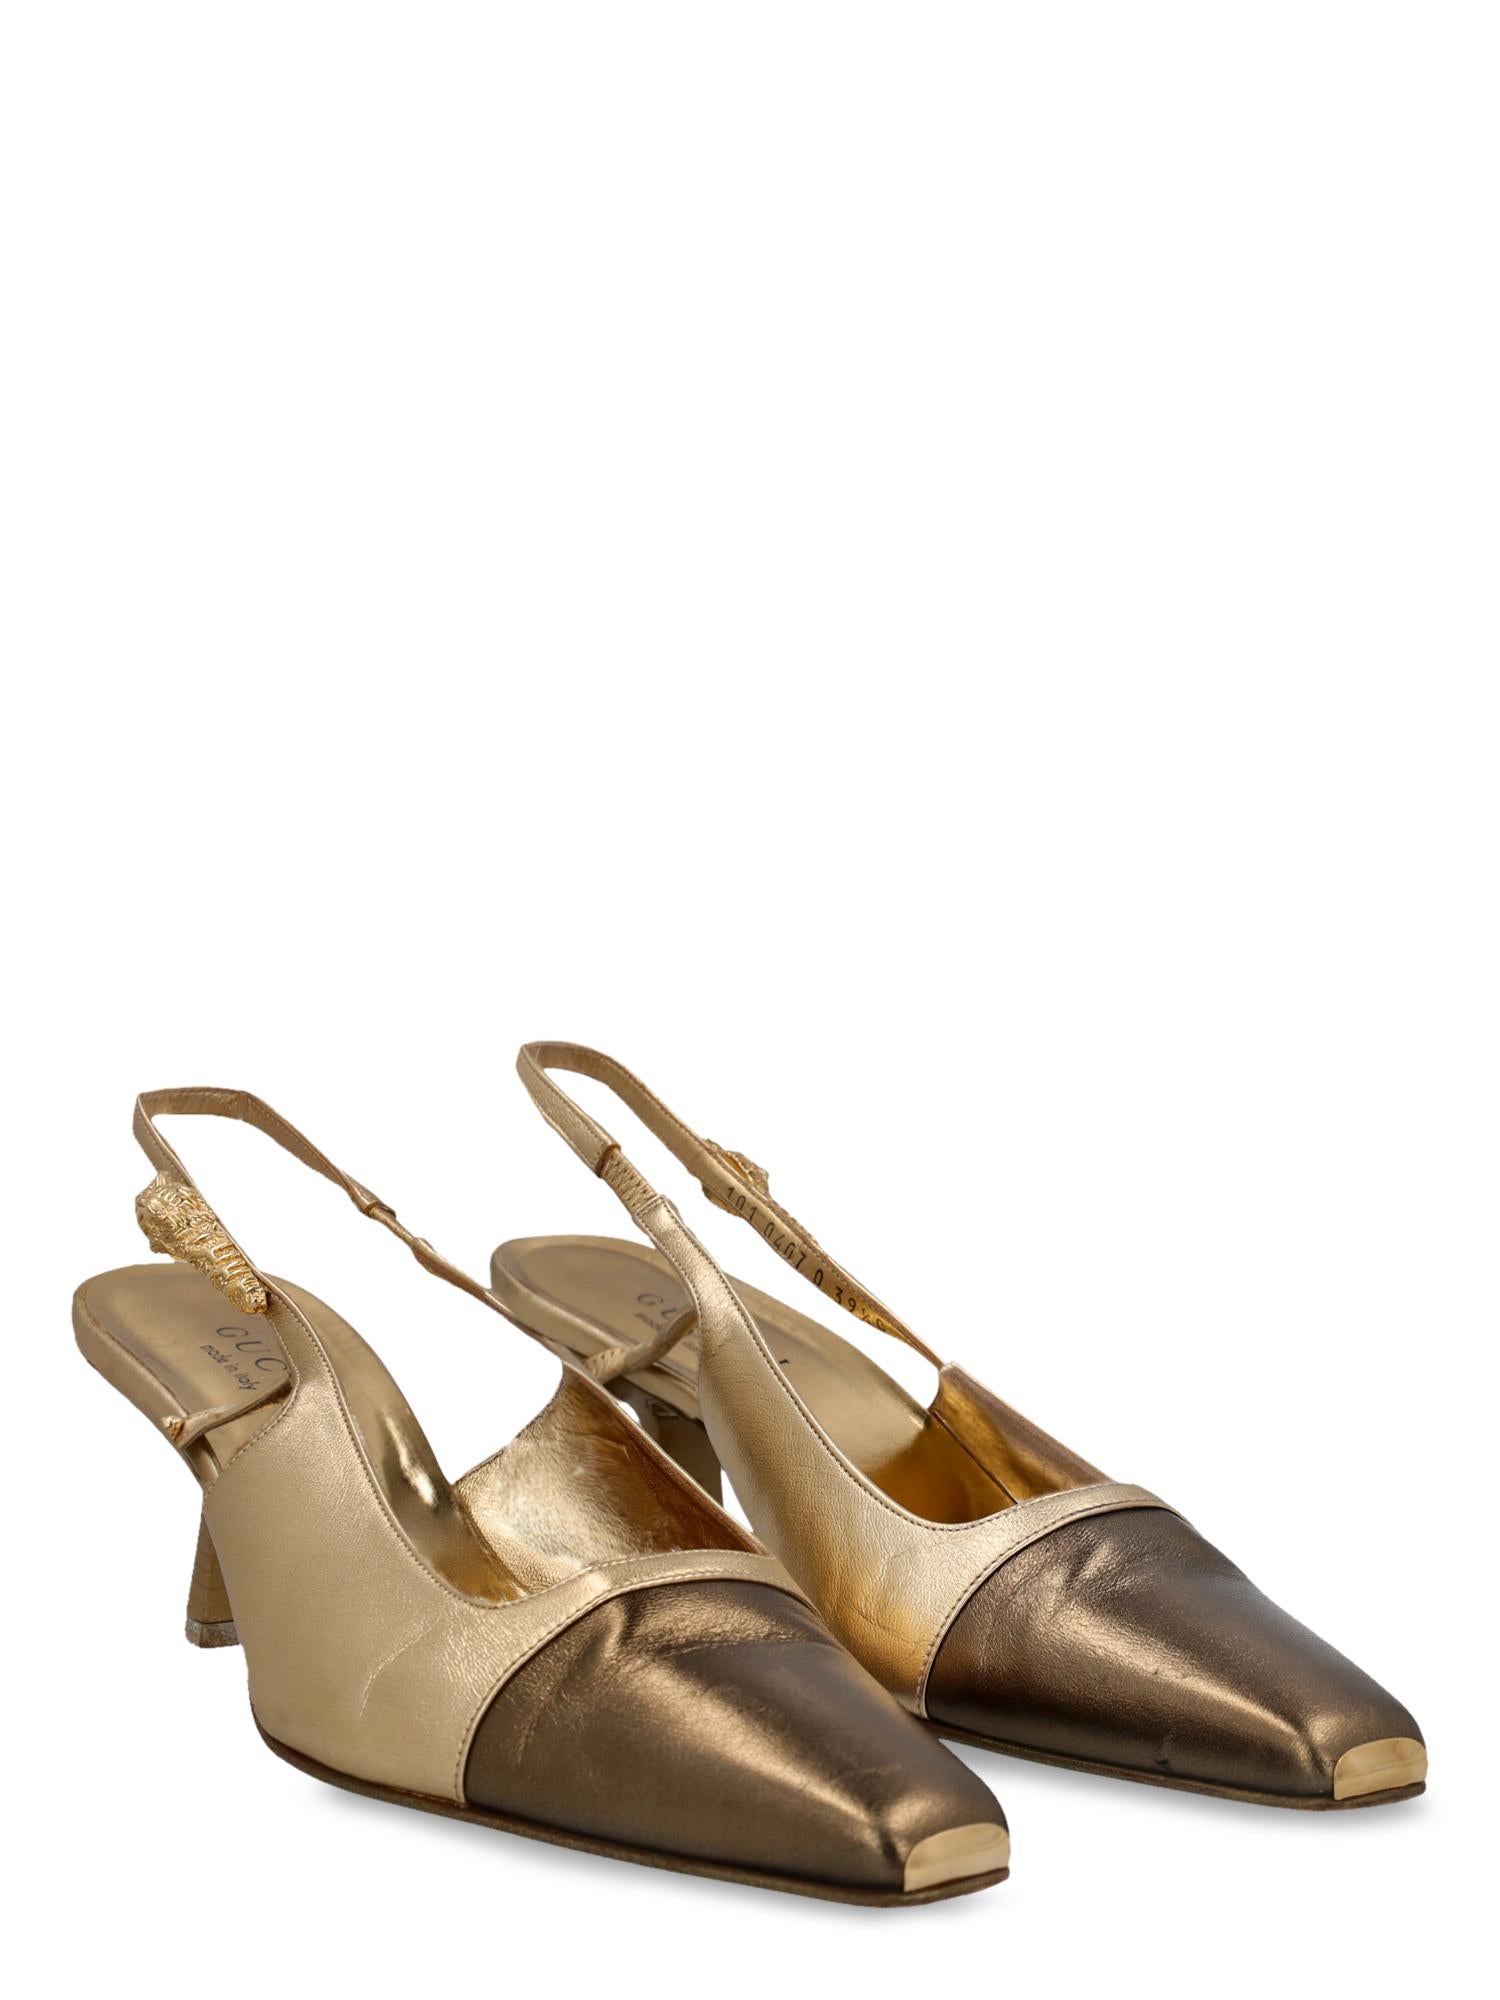 Product Description: Pumps, leather, solid color, metallic effect, elasticated slingback fastening, gold-tone hardware, square toe, branded insole, block heel, low and flat heel, relief details

Includes: N/A

Product Condition: Good
Heel: slightly